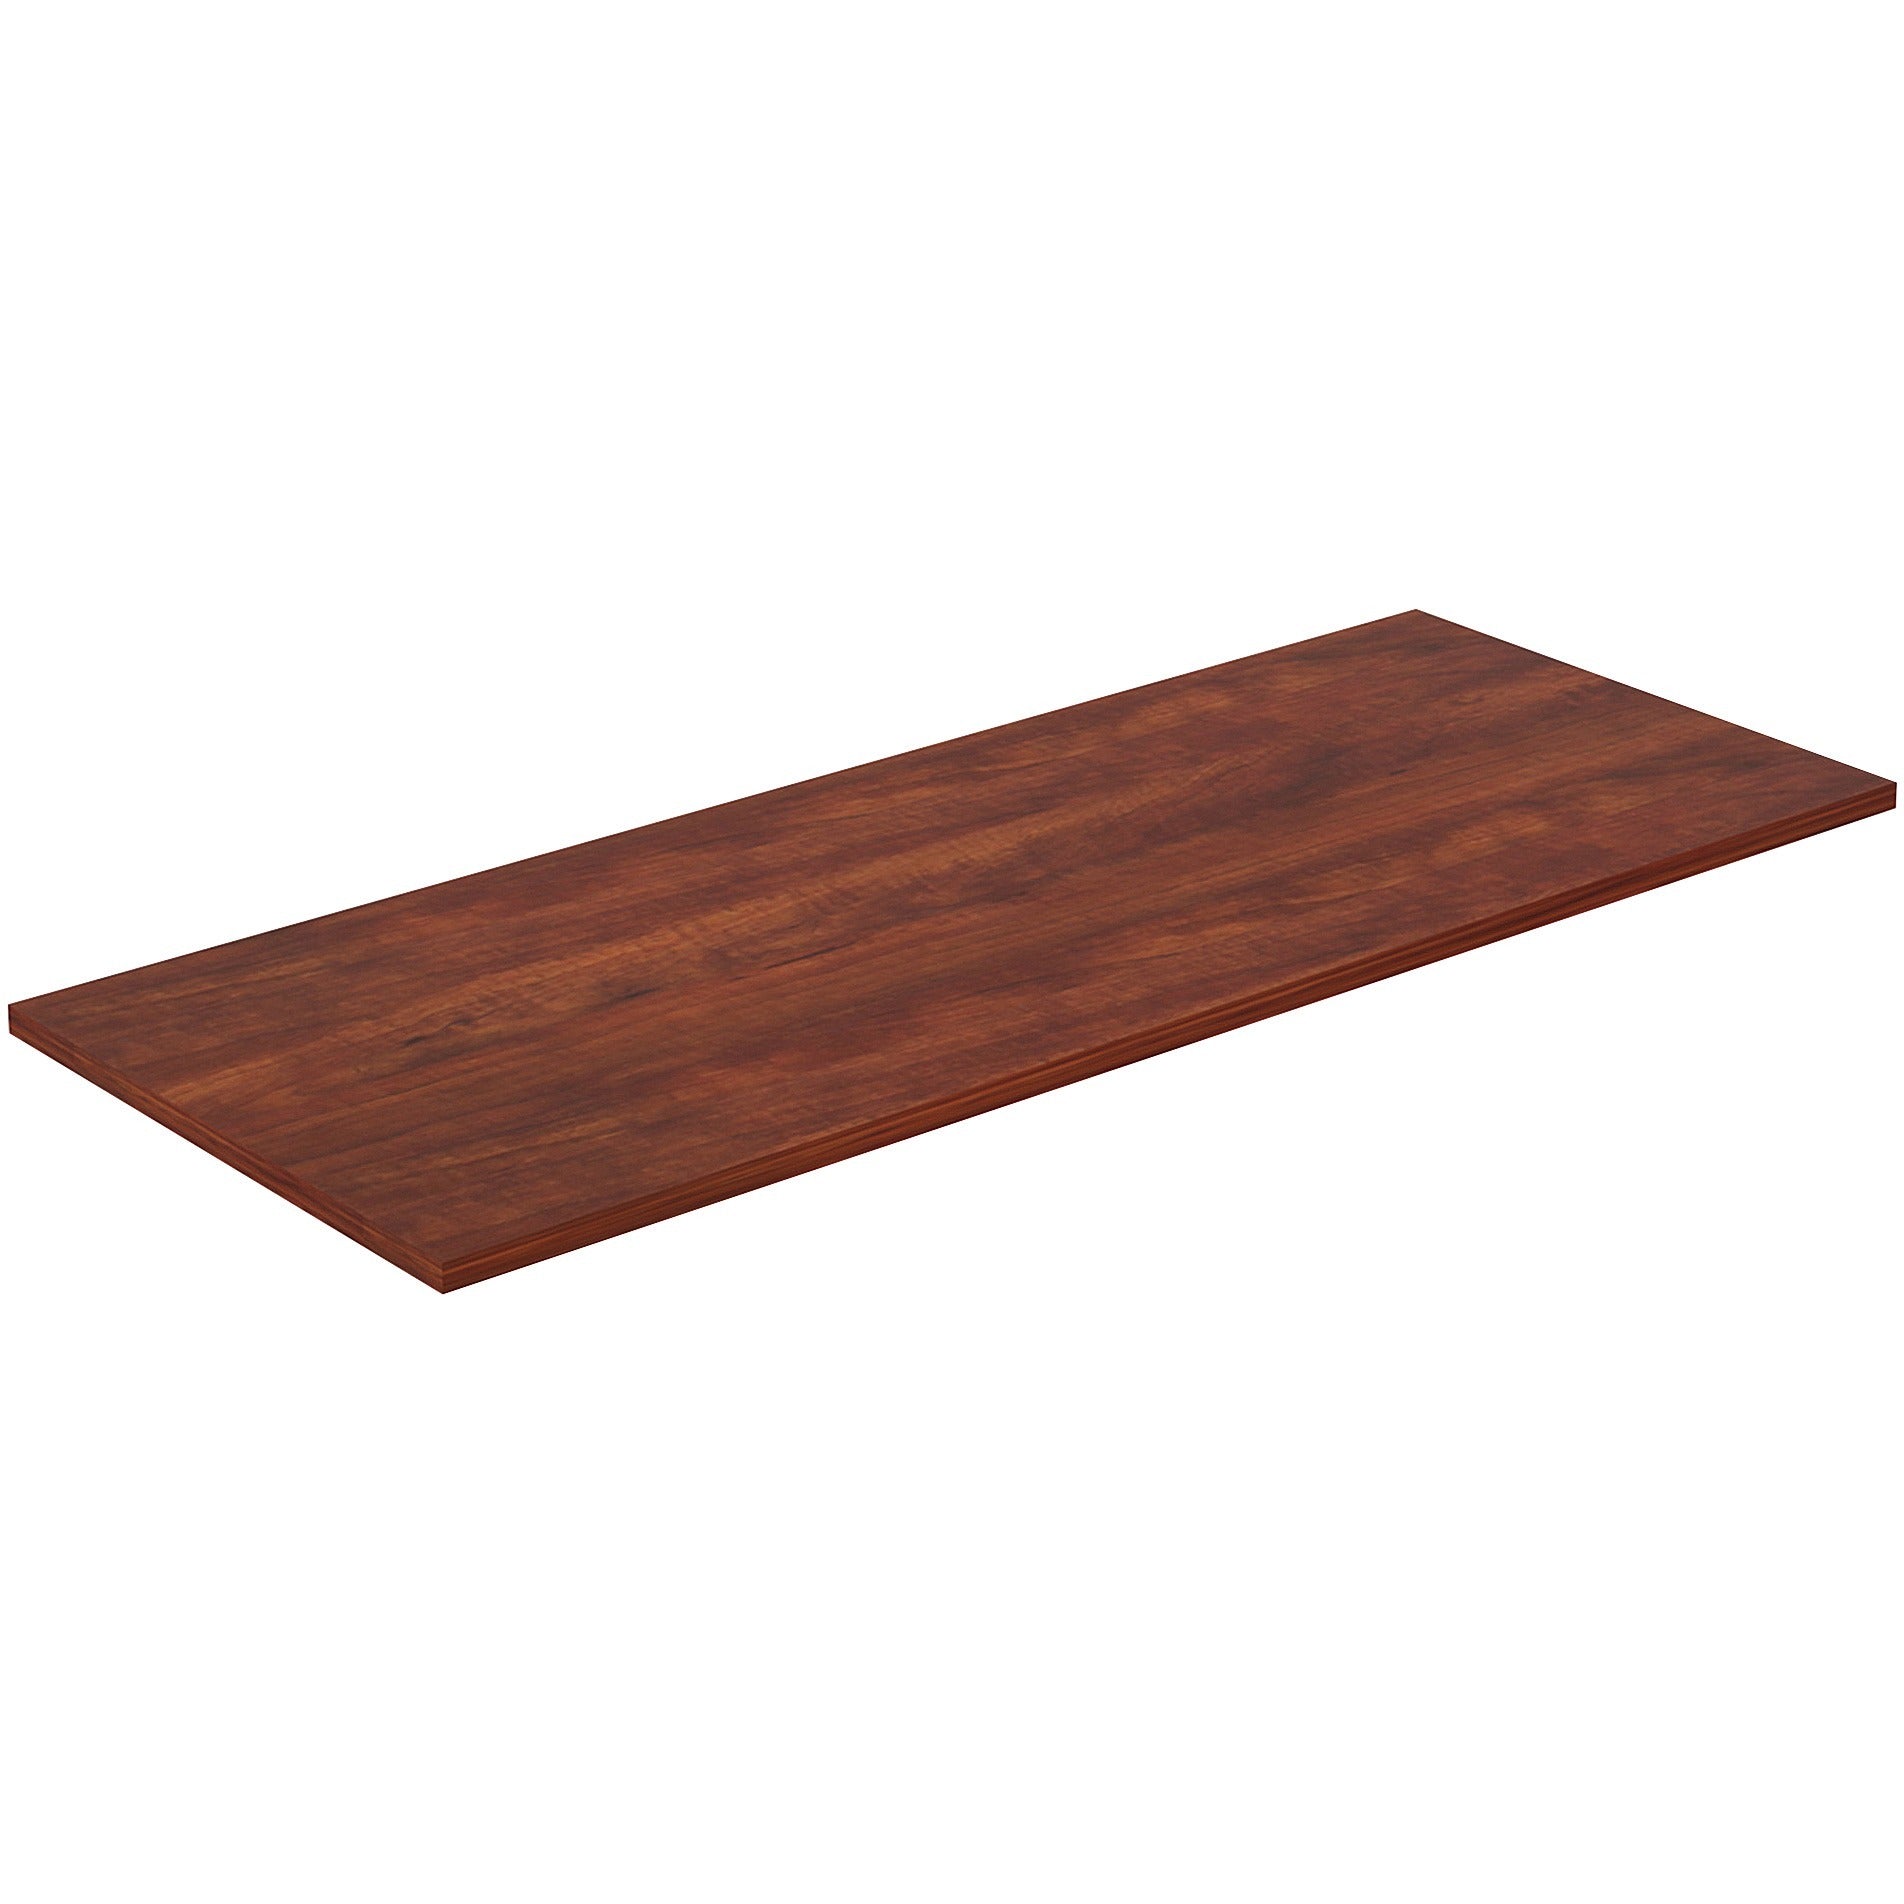 lorell-training-tabletop-for-table-topcherry-rectangle-laminated-top-adjustable-height-x-60-table-top-width-x-24-table-top-depth-x-1-table-top-thickness-assembly-required-1-each_llr59634 - 3